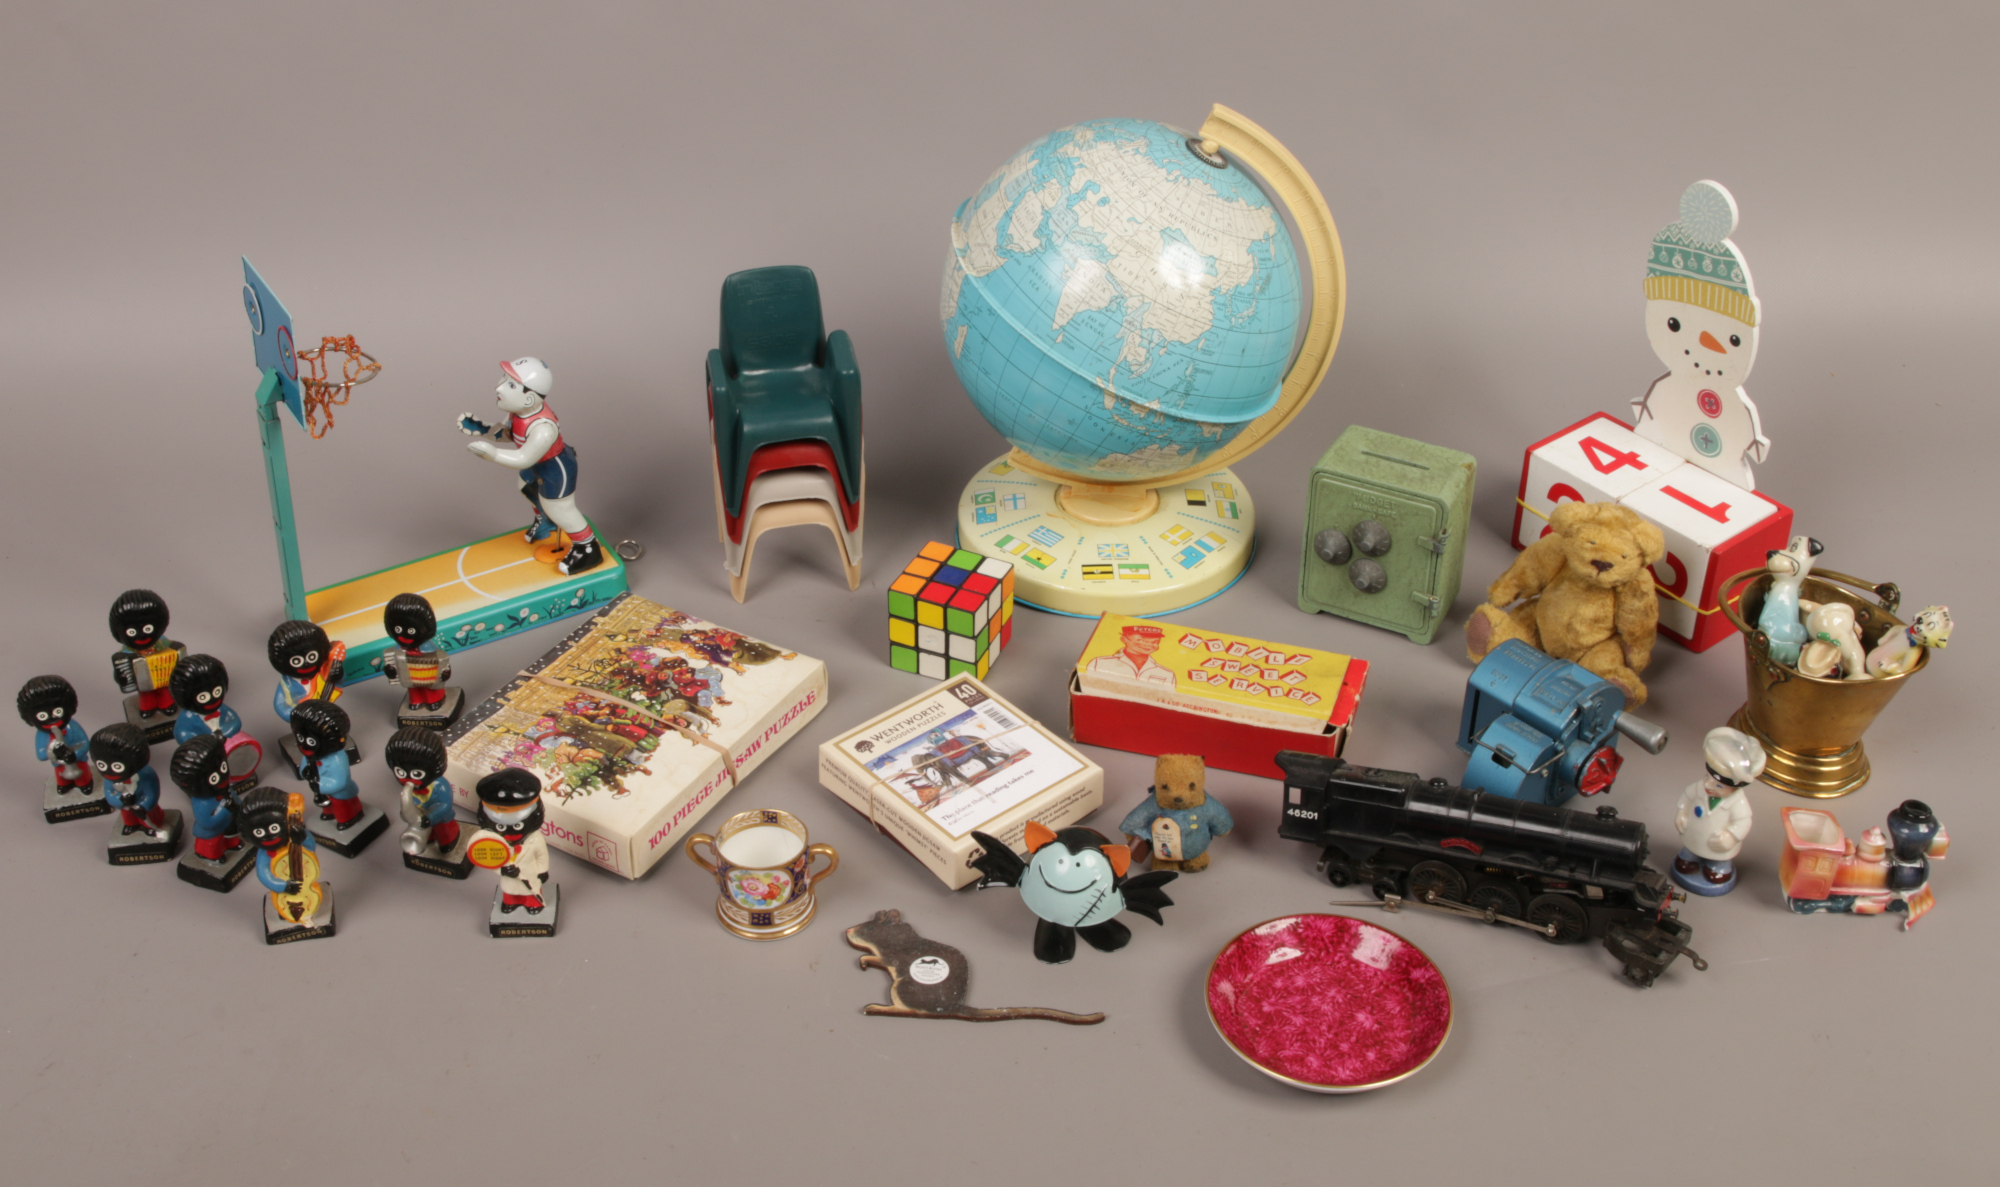 A box of vintage and later toys including Chad Valley tinplate globe, Midget bank safe, Robertsons